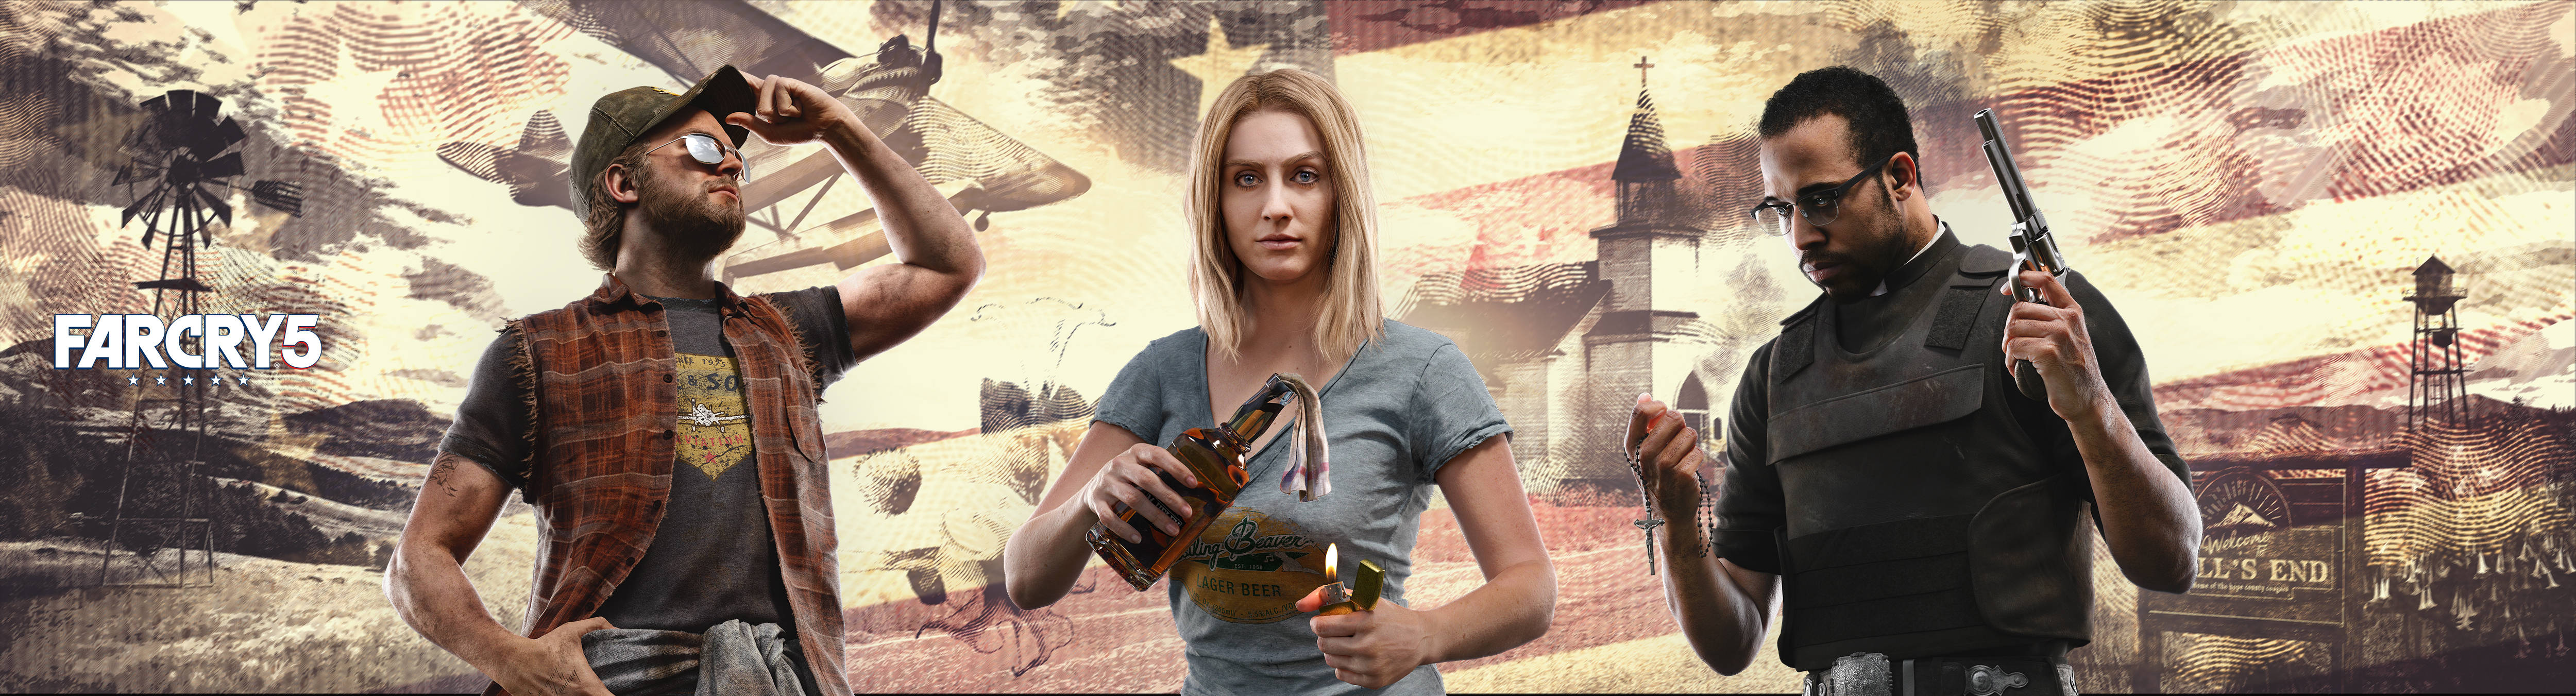 Far Cry 5 Characters Against Us Flag Background